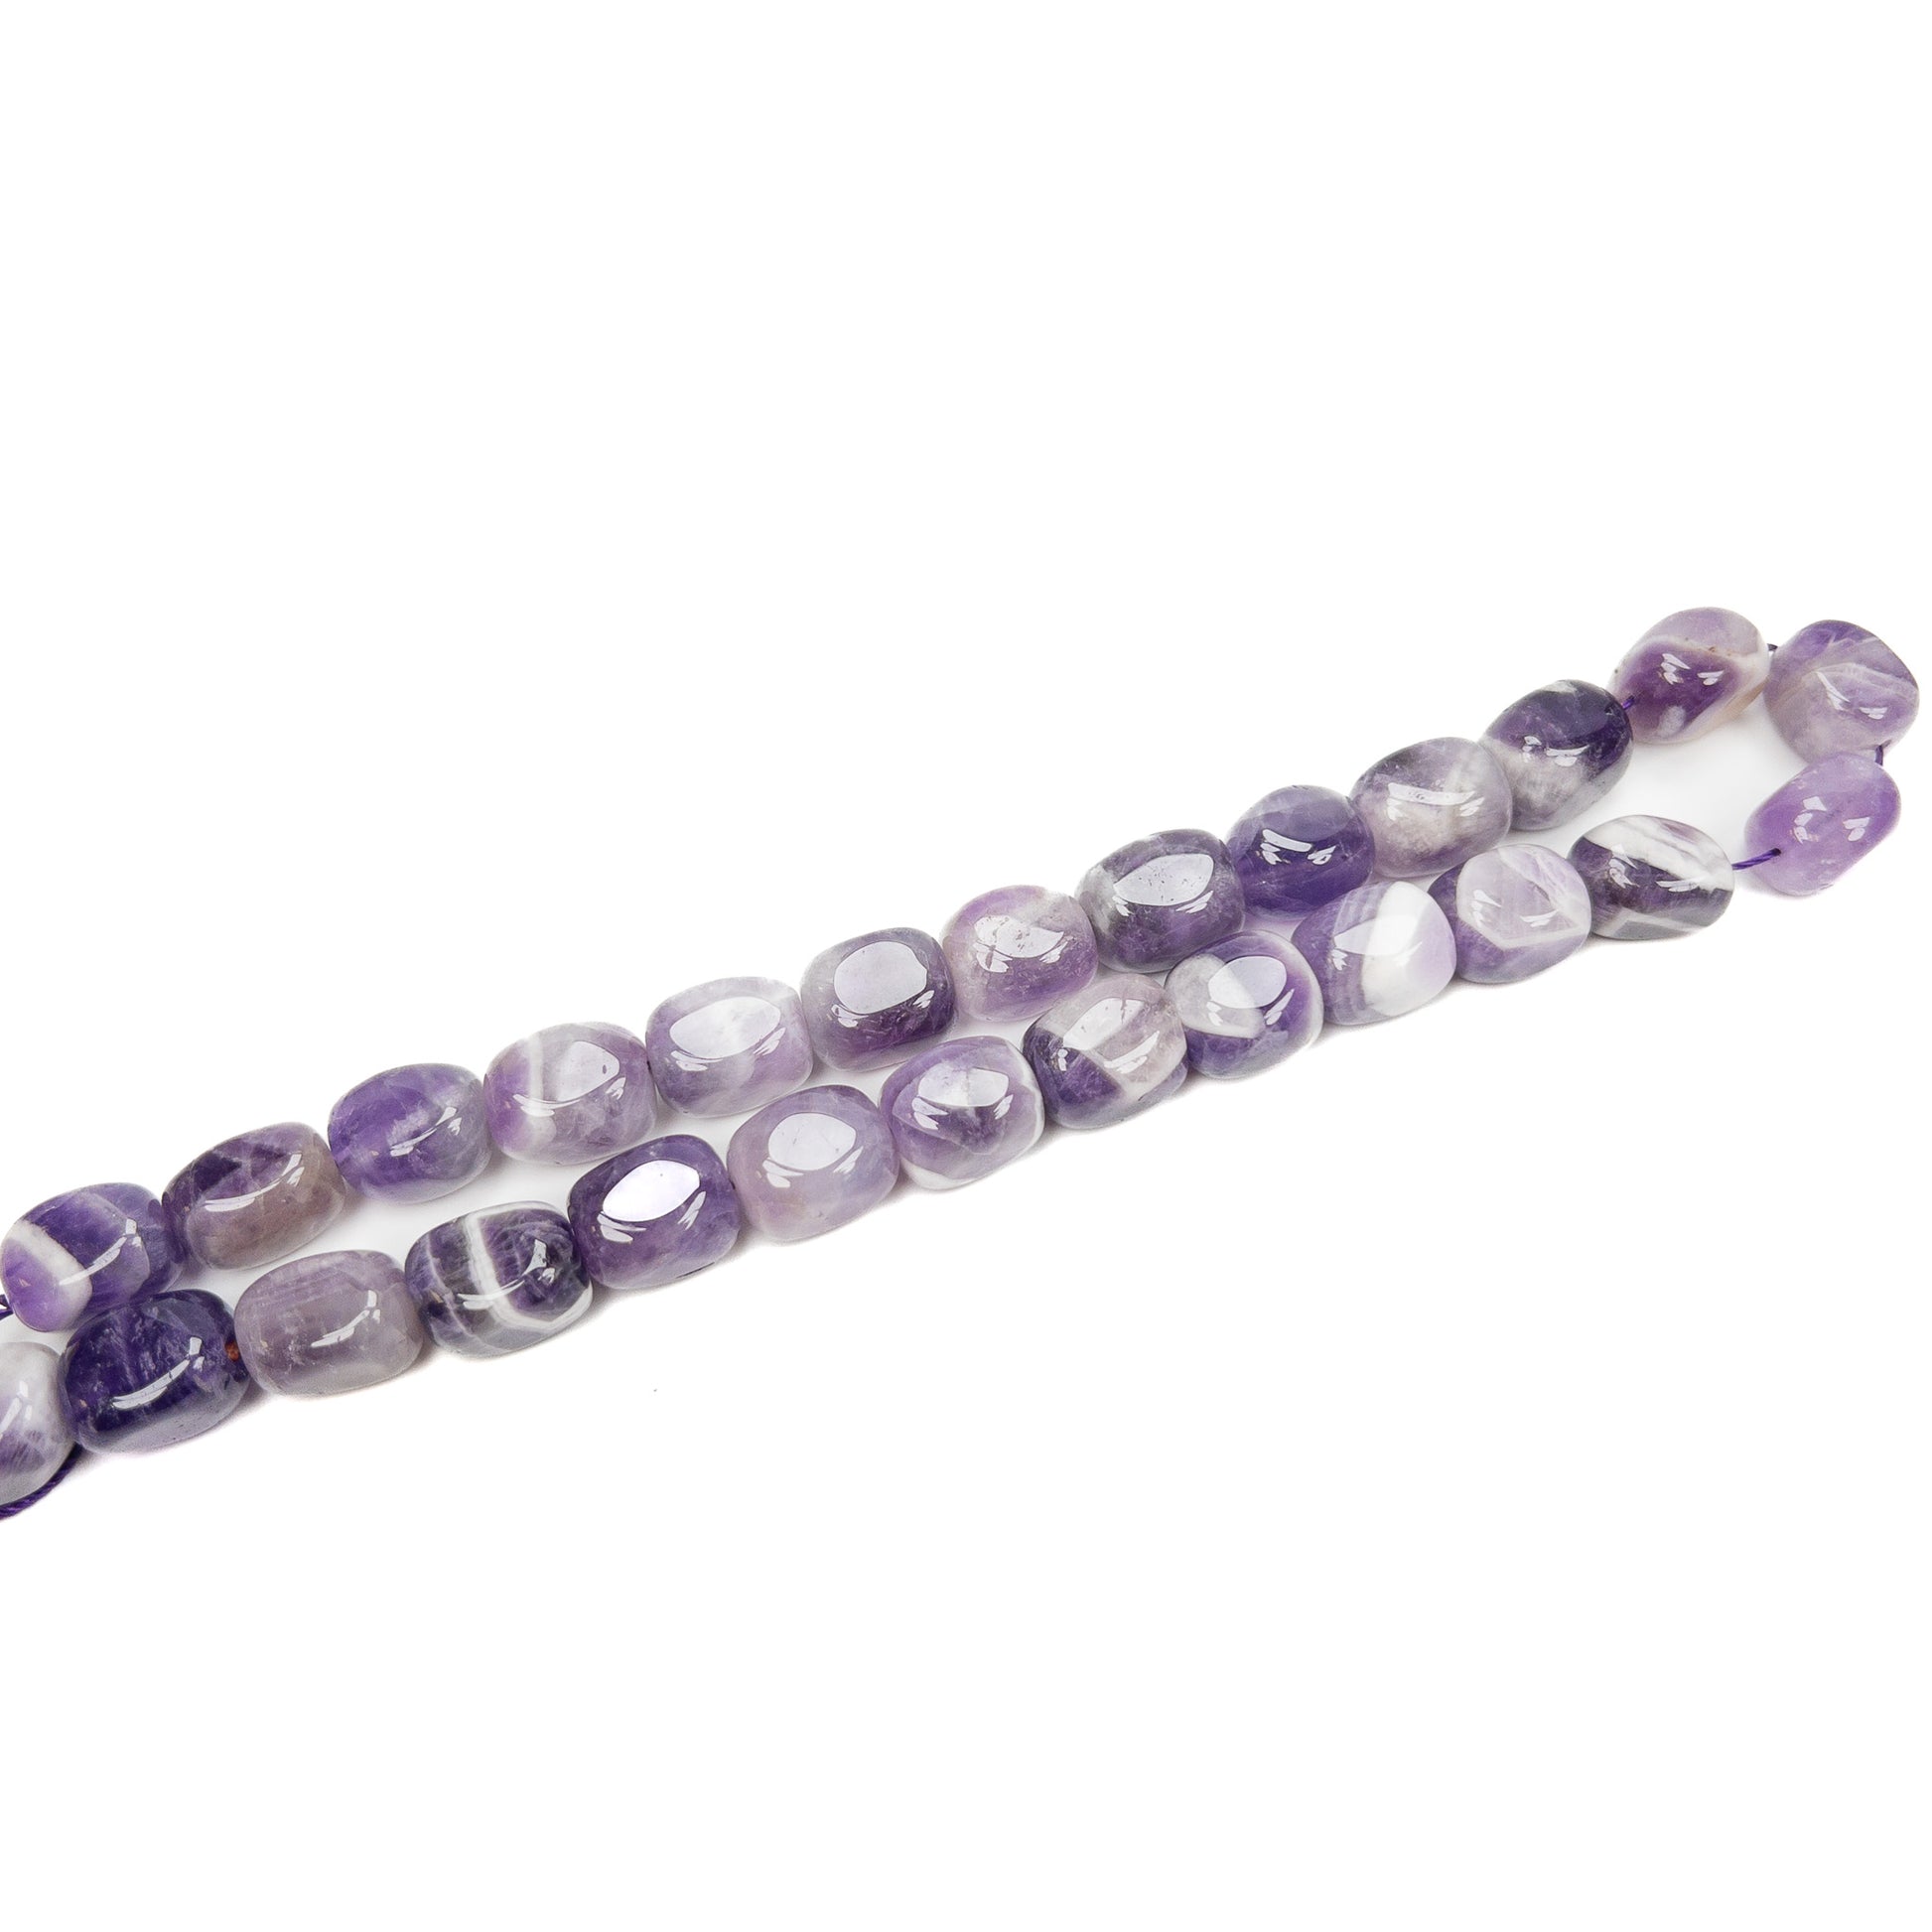 Banded Amethyst Large 15x12mm Tumbled Nugget Bead - 7.75" Strand-The Bead Gallery Honolulu